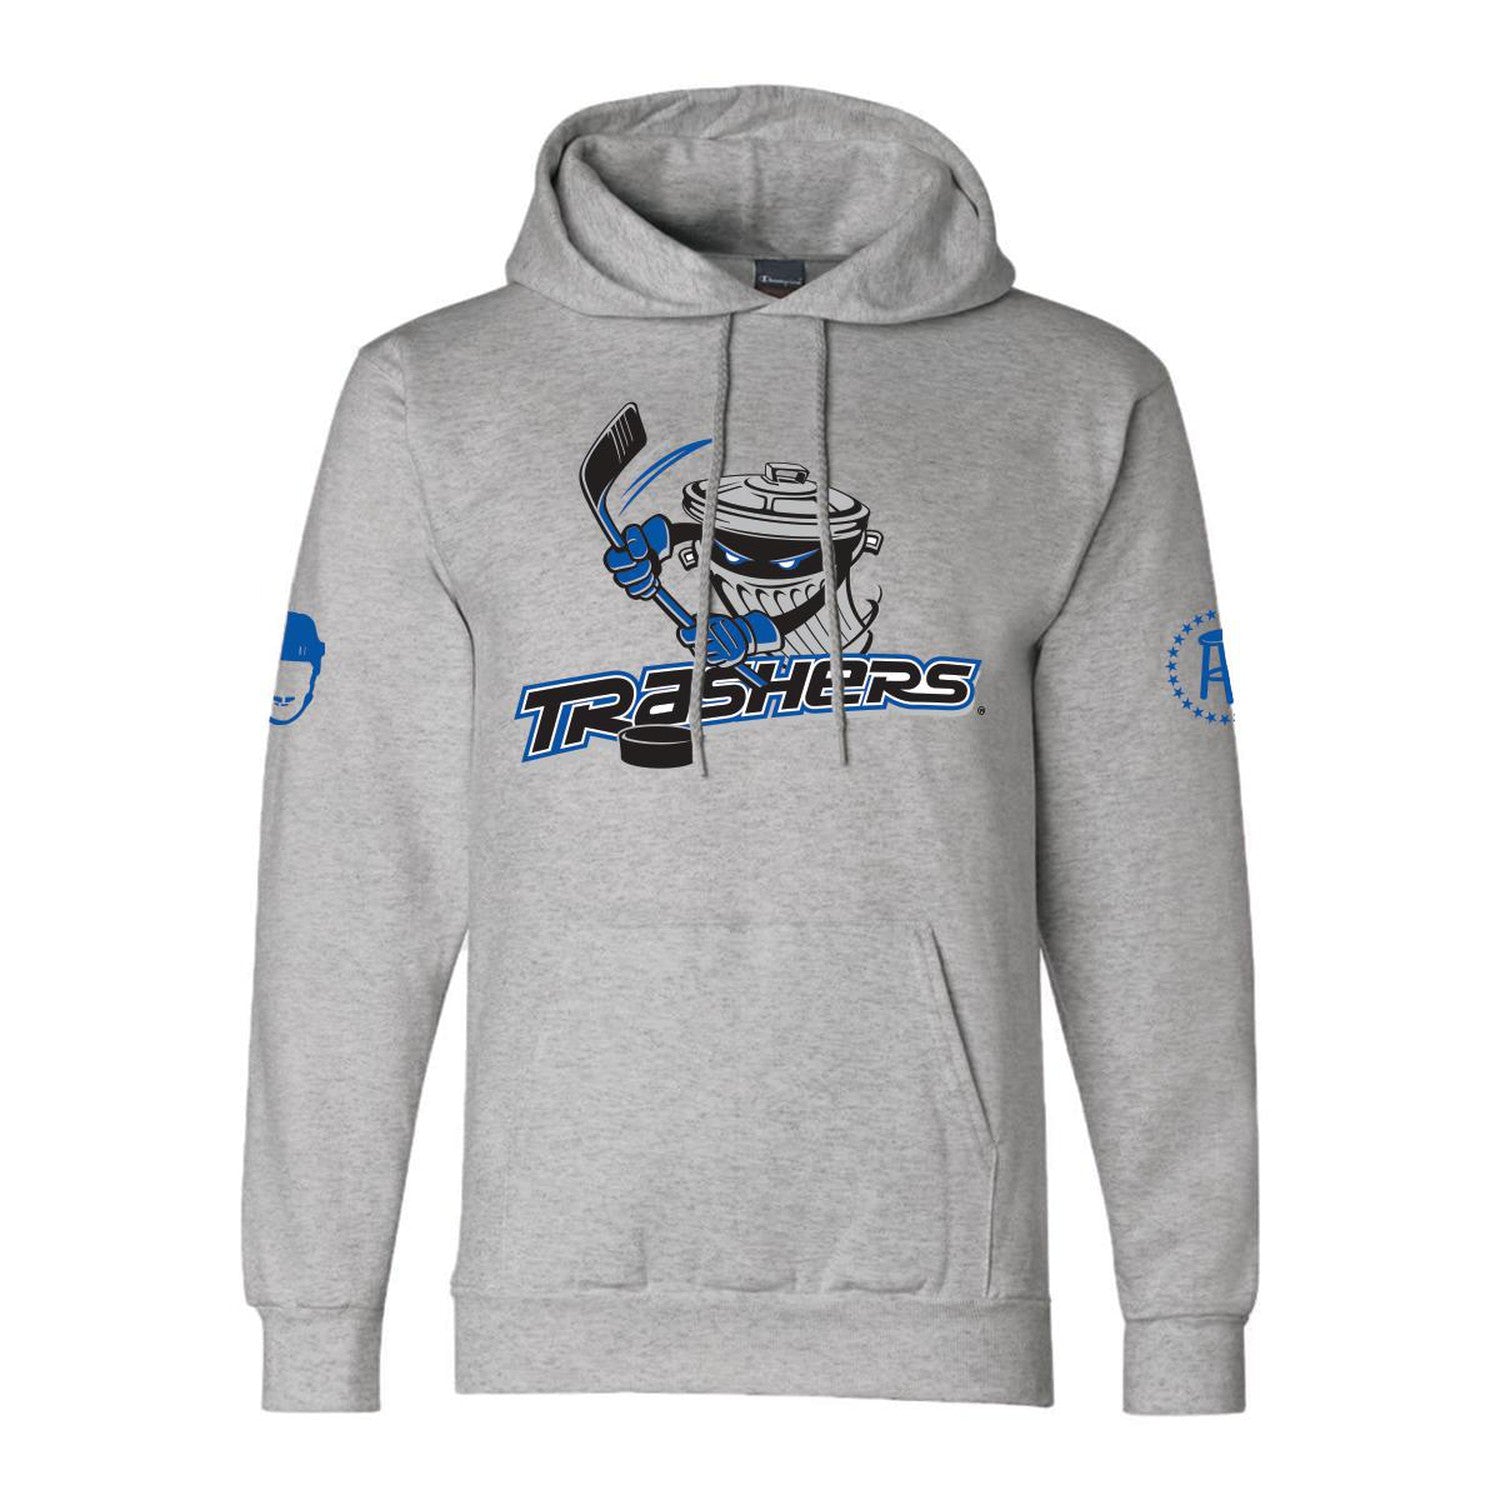 Danbury Trashers Merchandise Now Available Due to High Demand